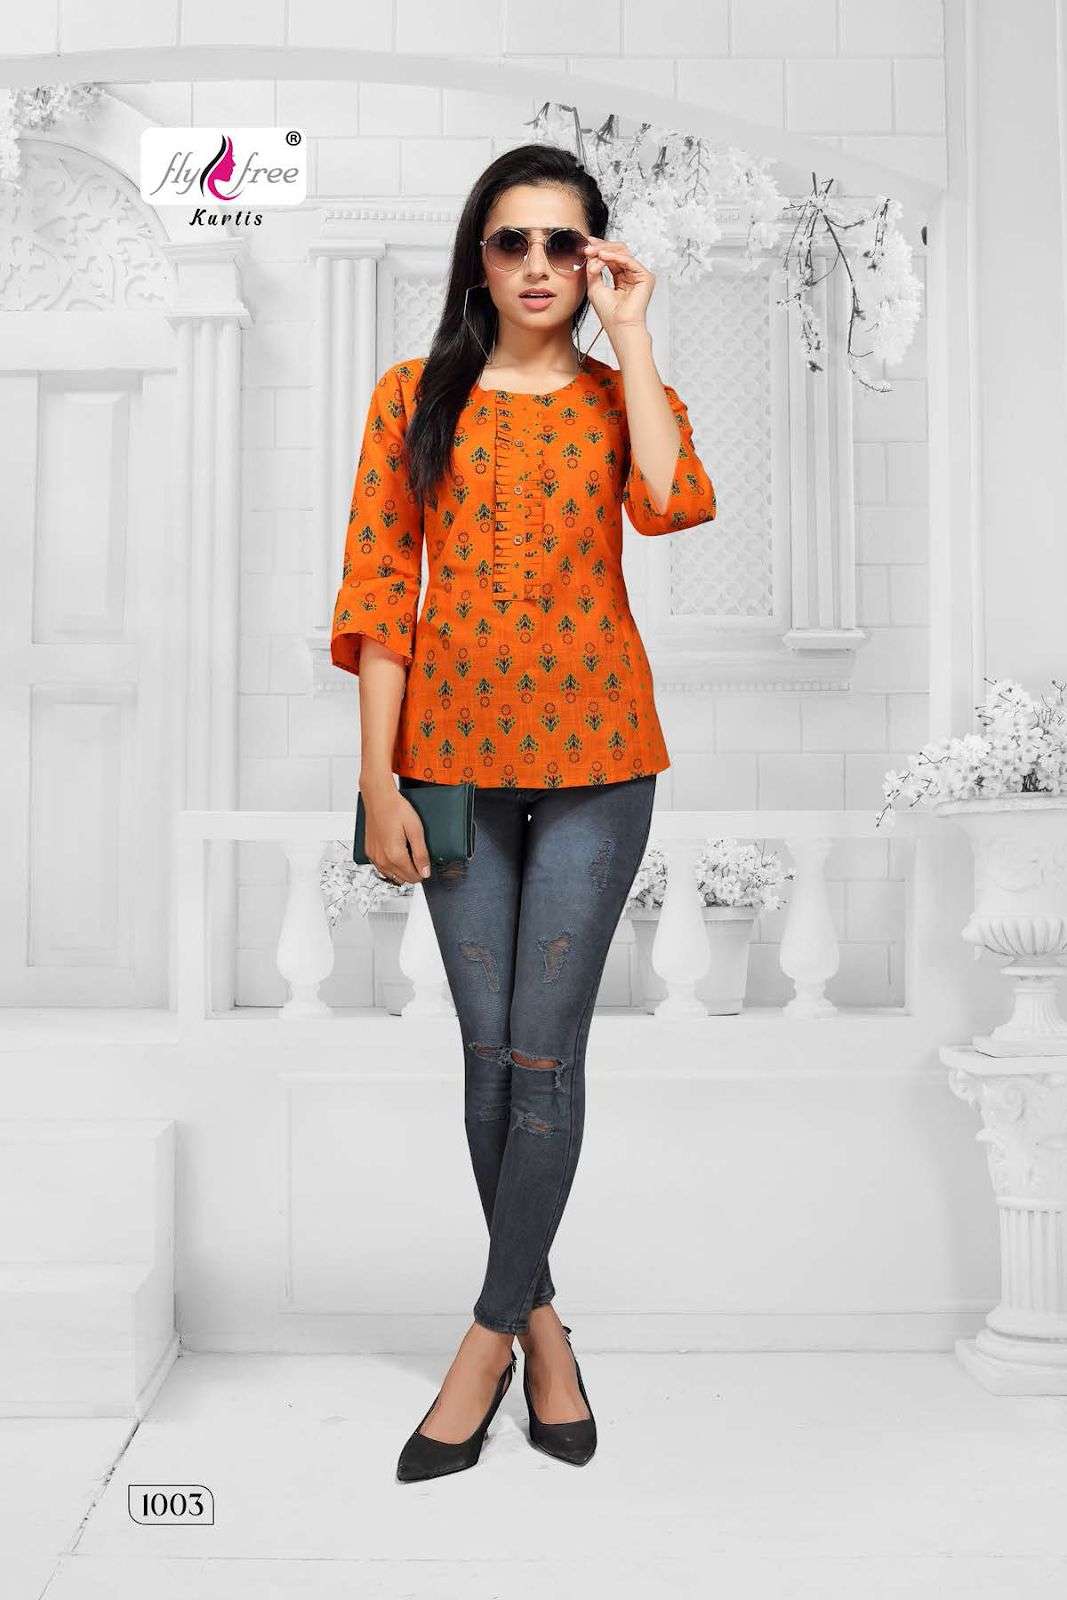 RANG VOL-3 BY FLY FREE 1001 TO 1008 SERIES DESIGNER STYLISH FANCY COLORFUL BEAUTIFUL PARTY WEAR & ETHNIC WEAR COLLECTION COTTON SLUB TOPS AT WHOLESALE PRICE